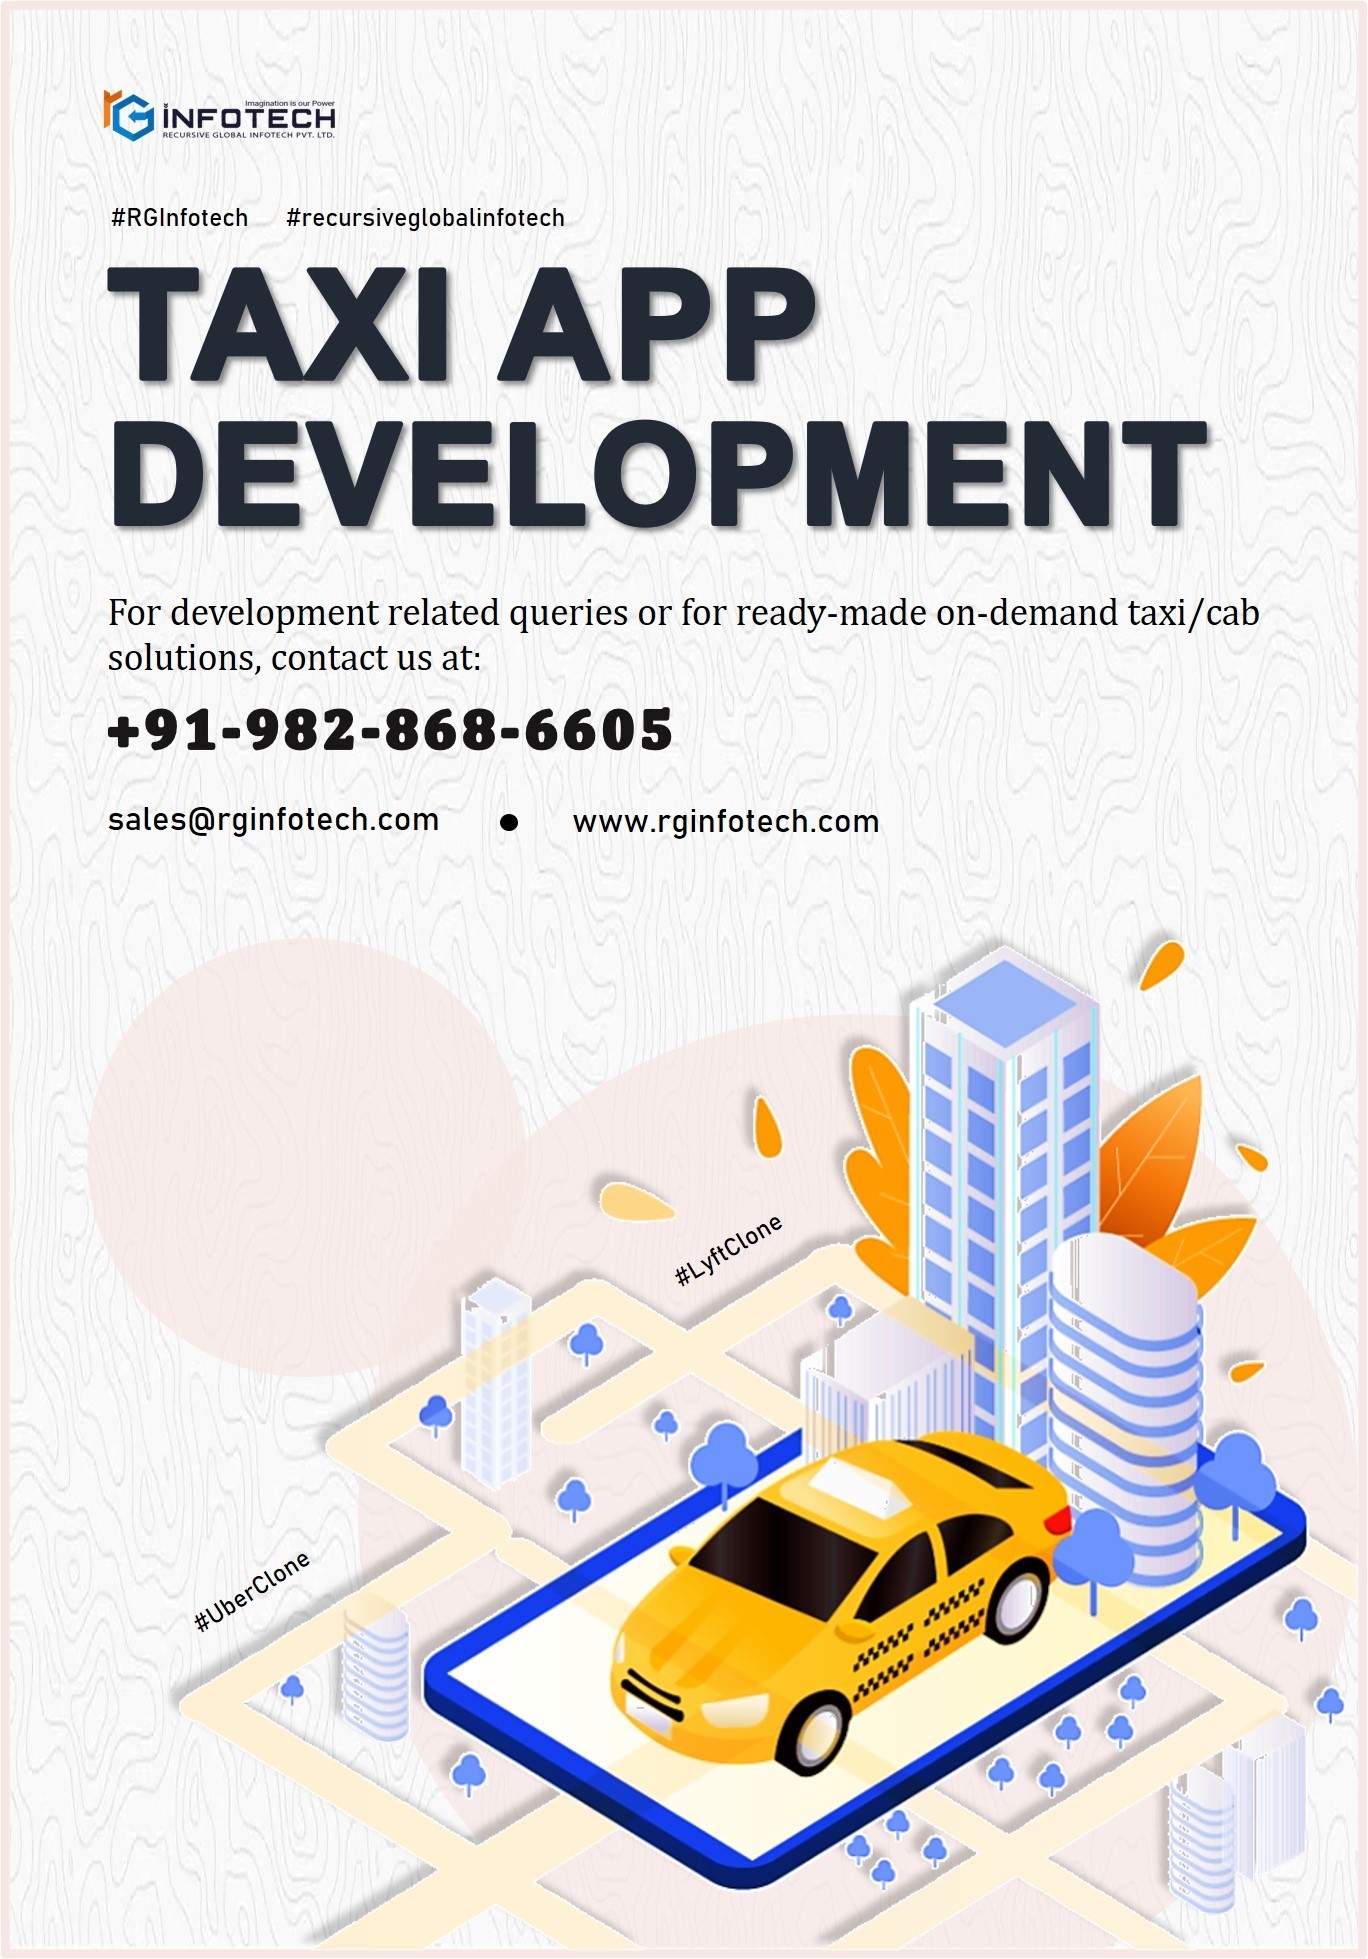 How to Build an Uber-like Taxi Booking Solution?